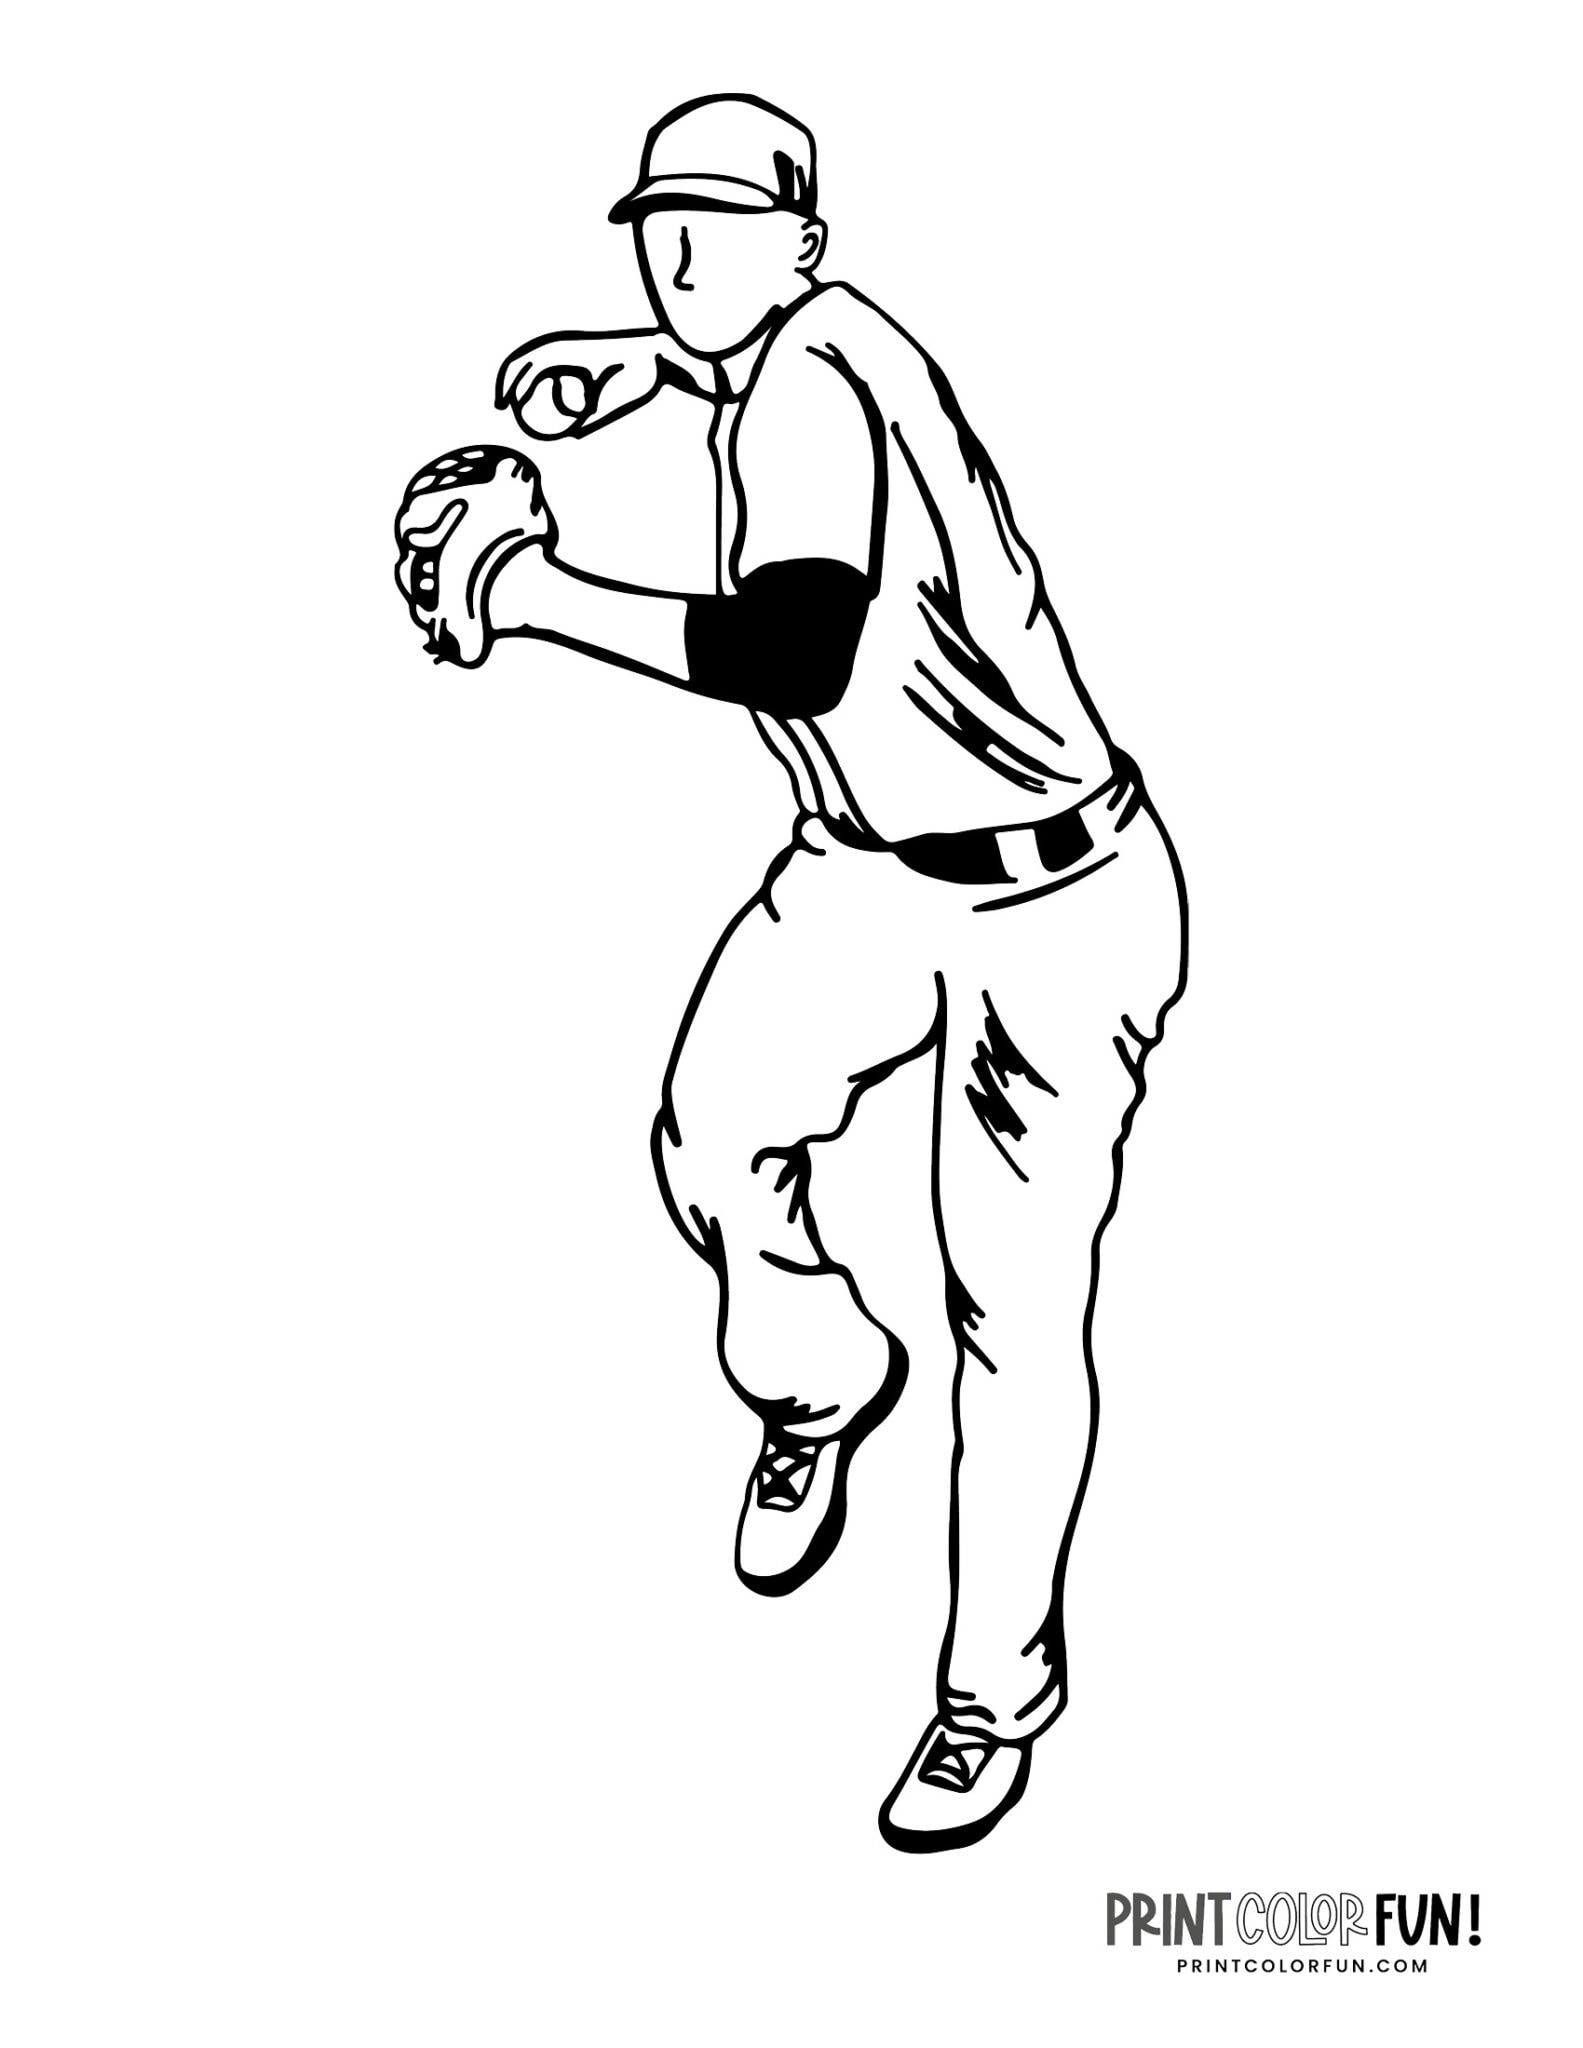 16 baseball player coloring pages & clipart: Free sports printables, at ...